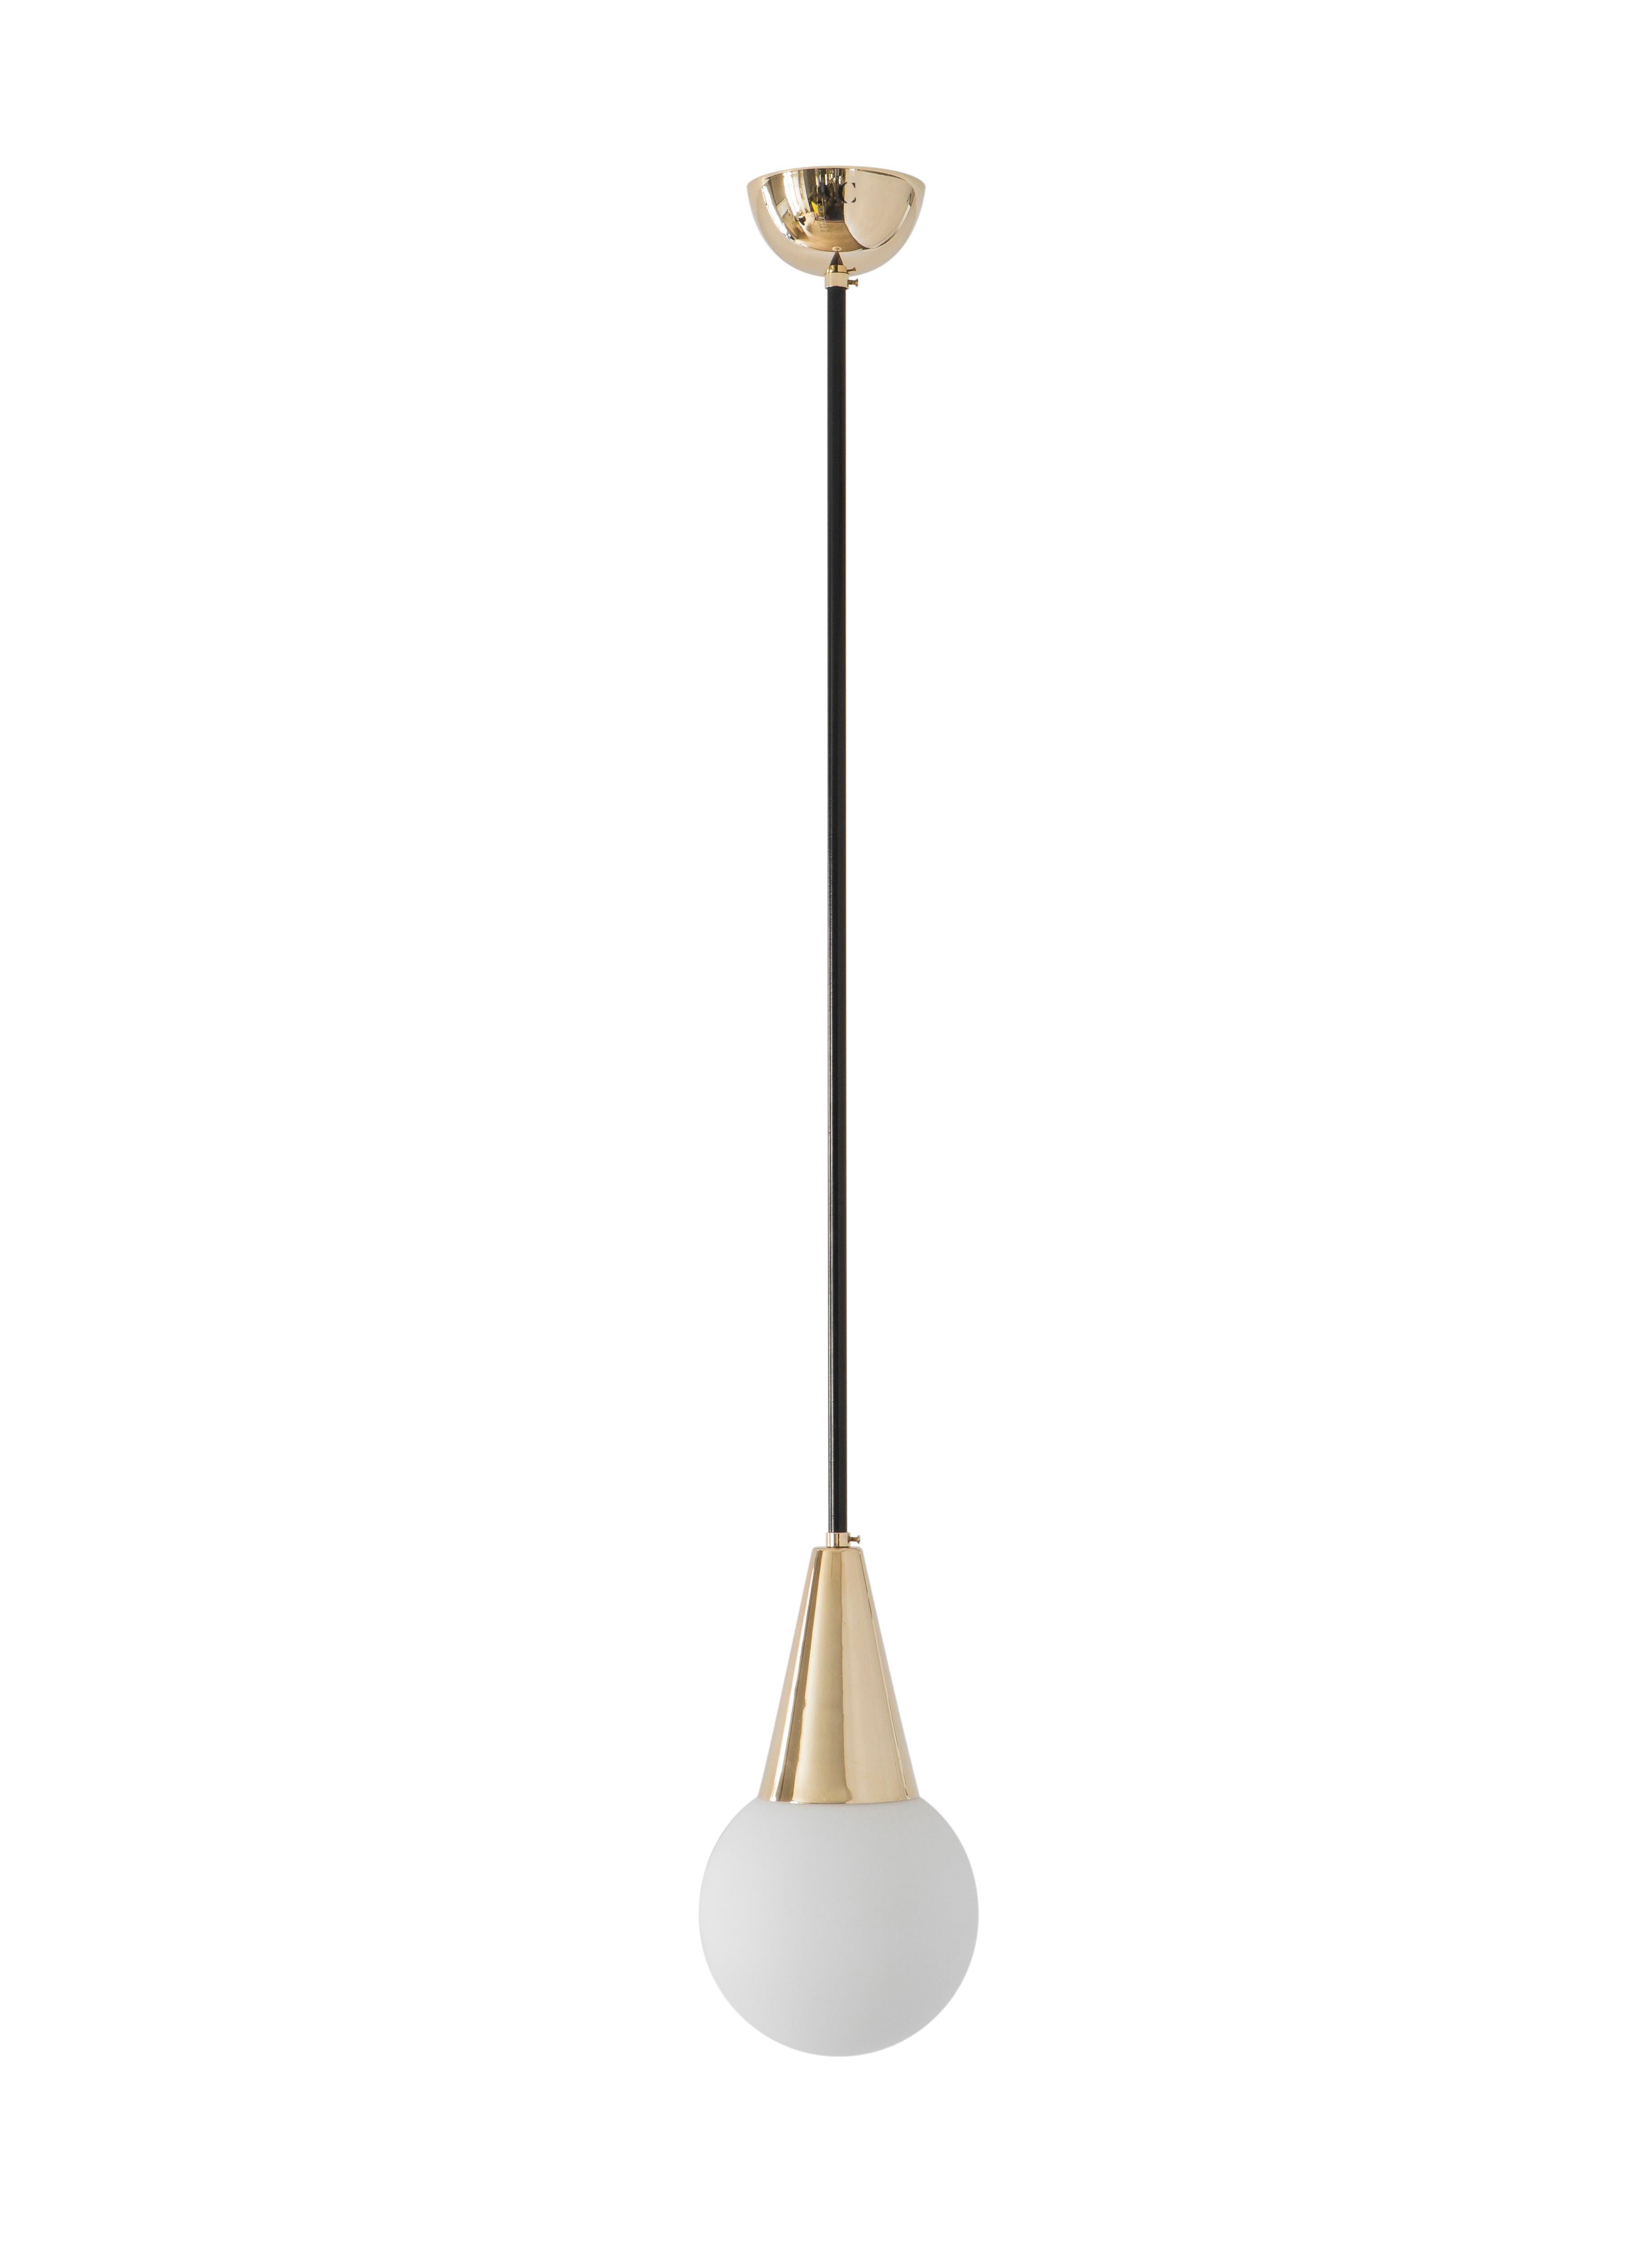 Pendant 05 black by Magic Circus Editions
Dimensions: D 25 x W 25 x H 190 cm, also available in H 110, 130, 150, 175 cm
Materials: Brass, mouth blown glass

All our lamps can be wired according to each country. If sold to the USA it will be